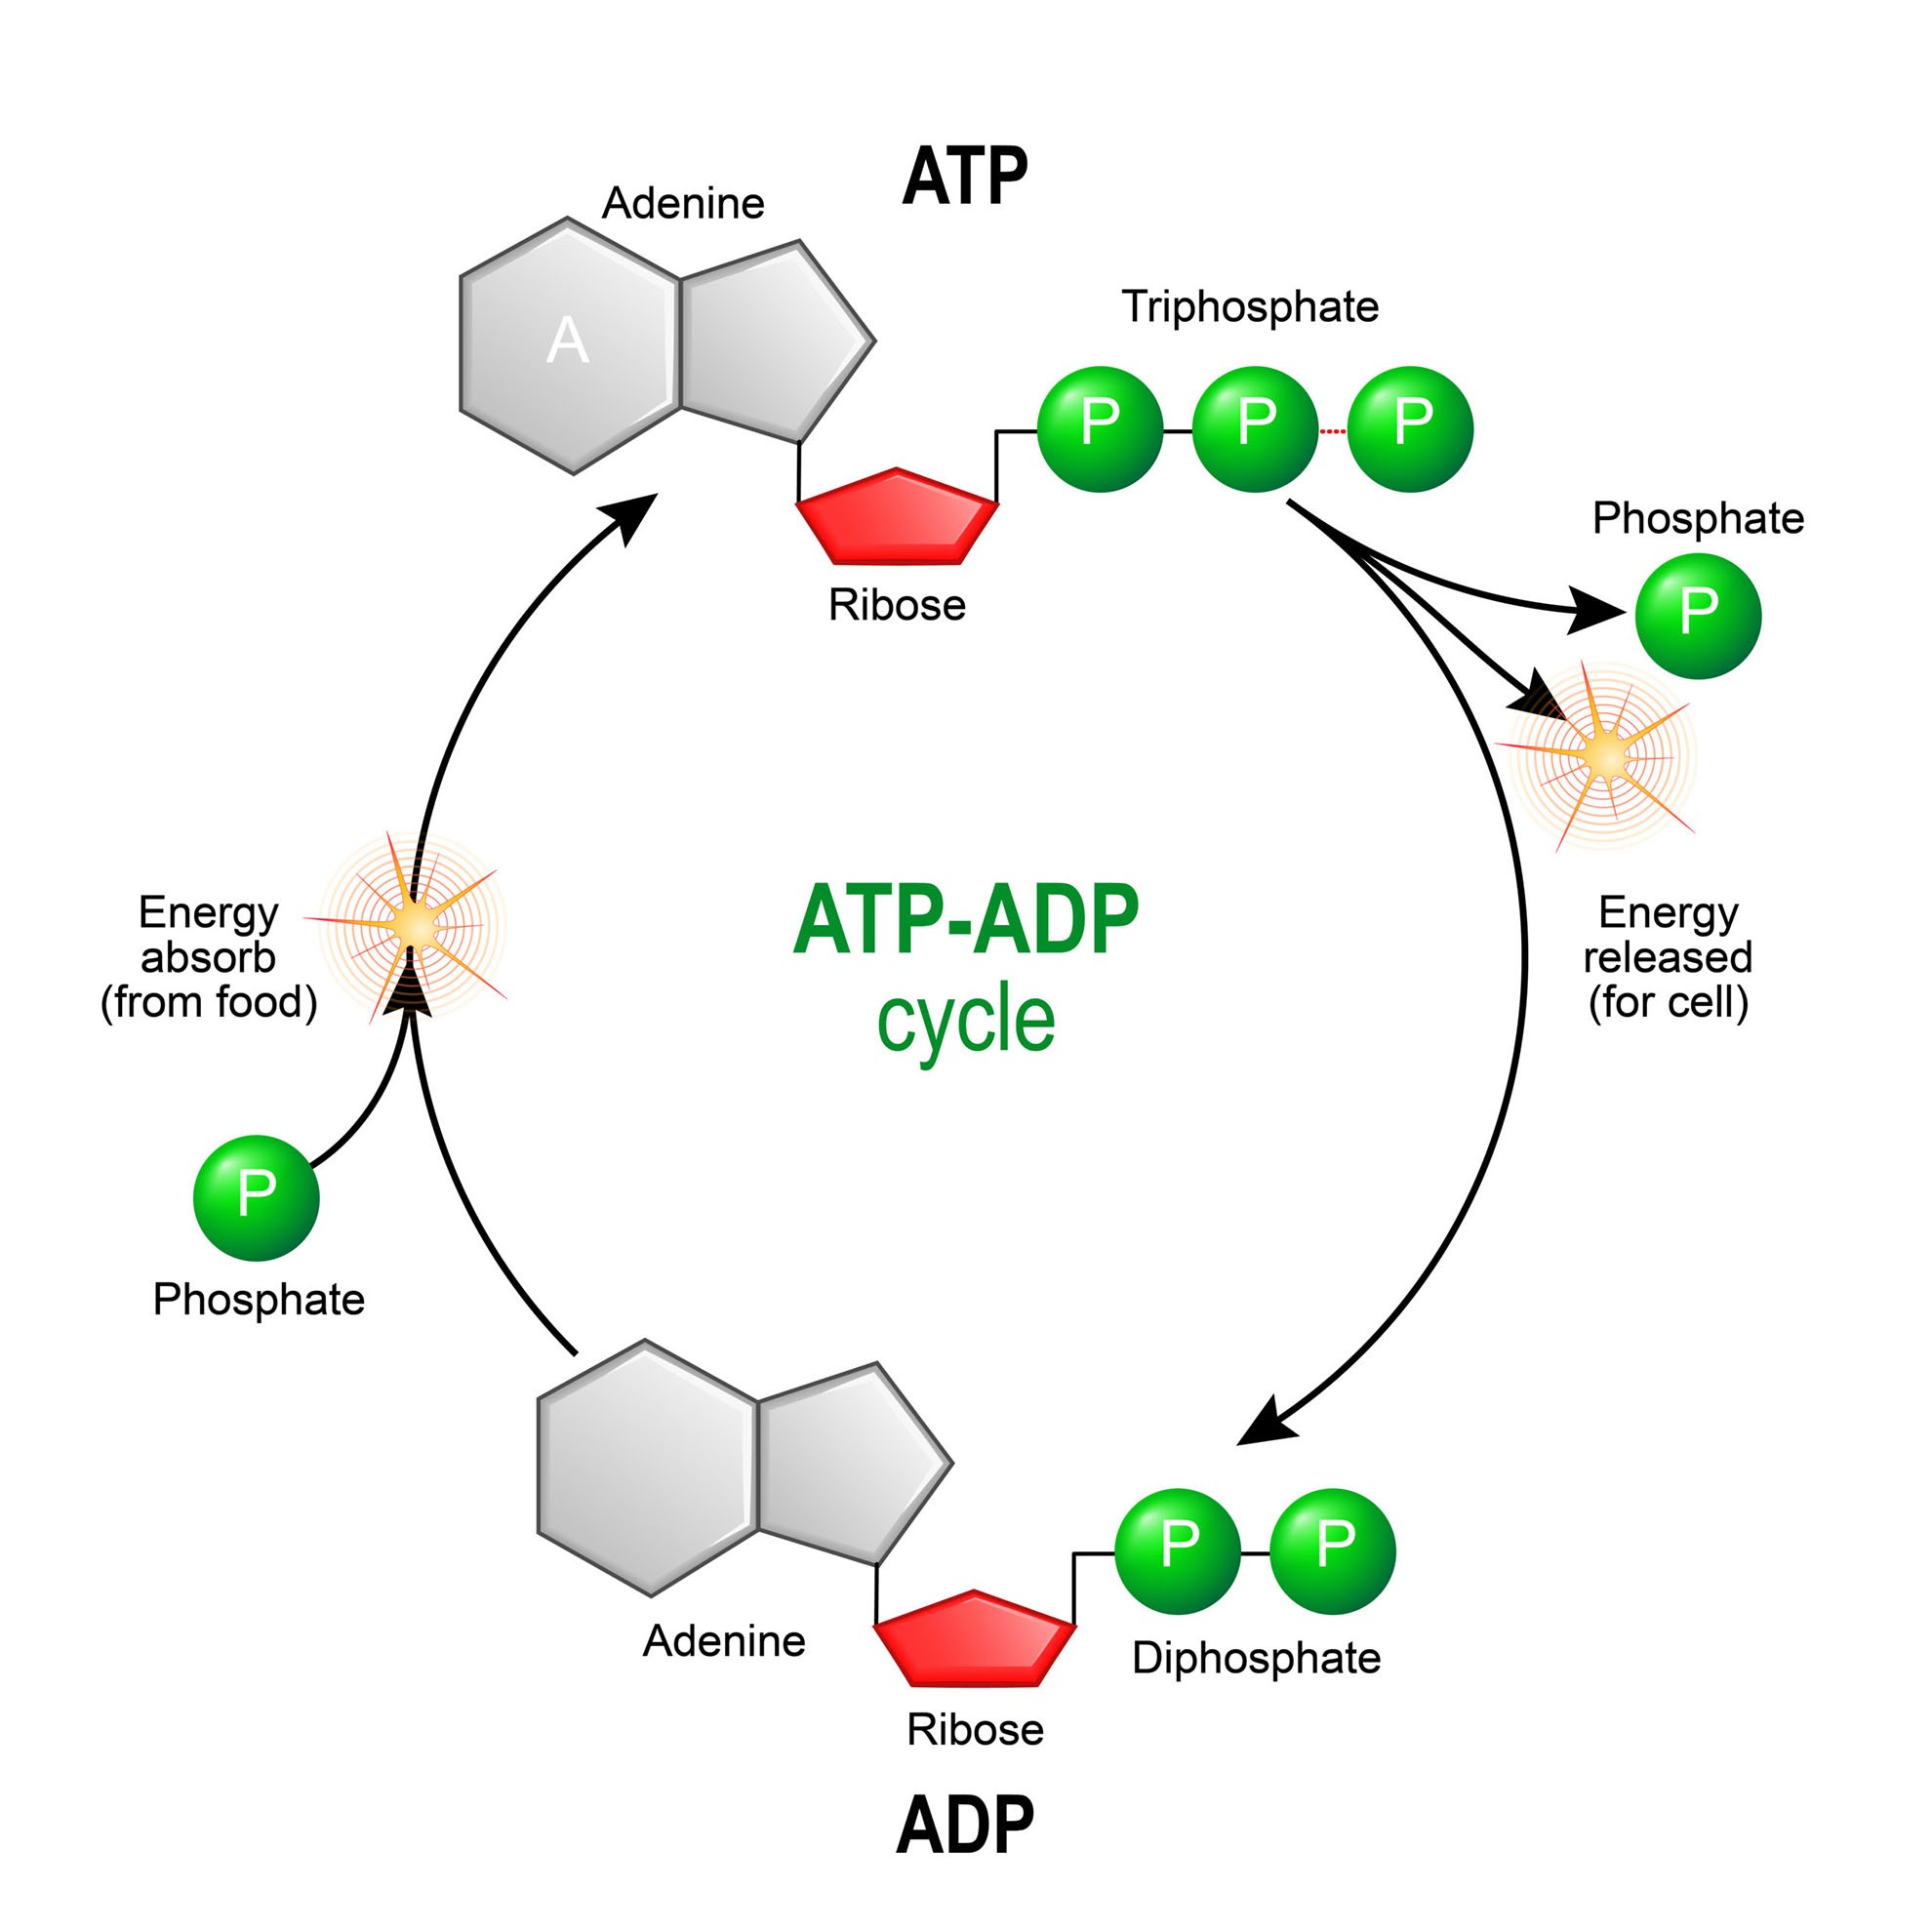 atp structure labeled